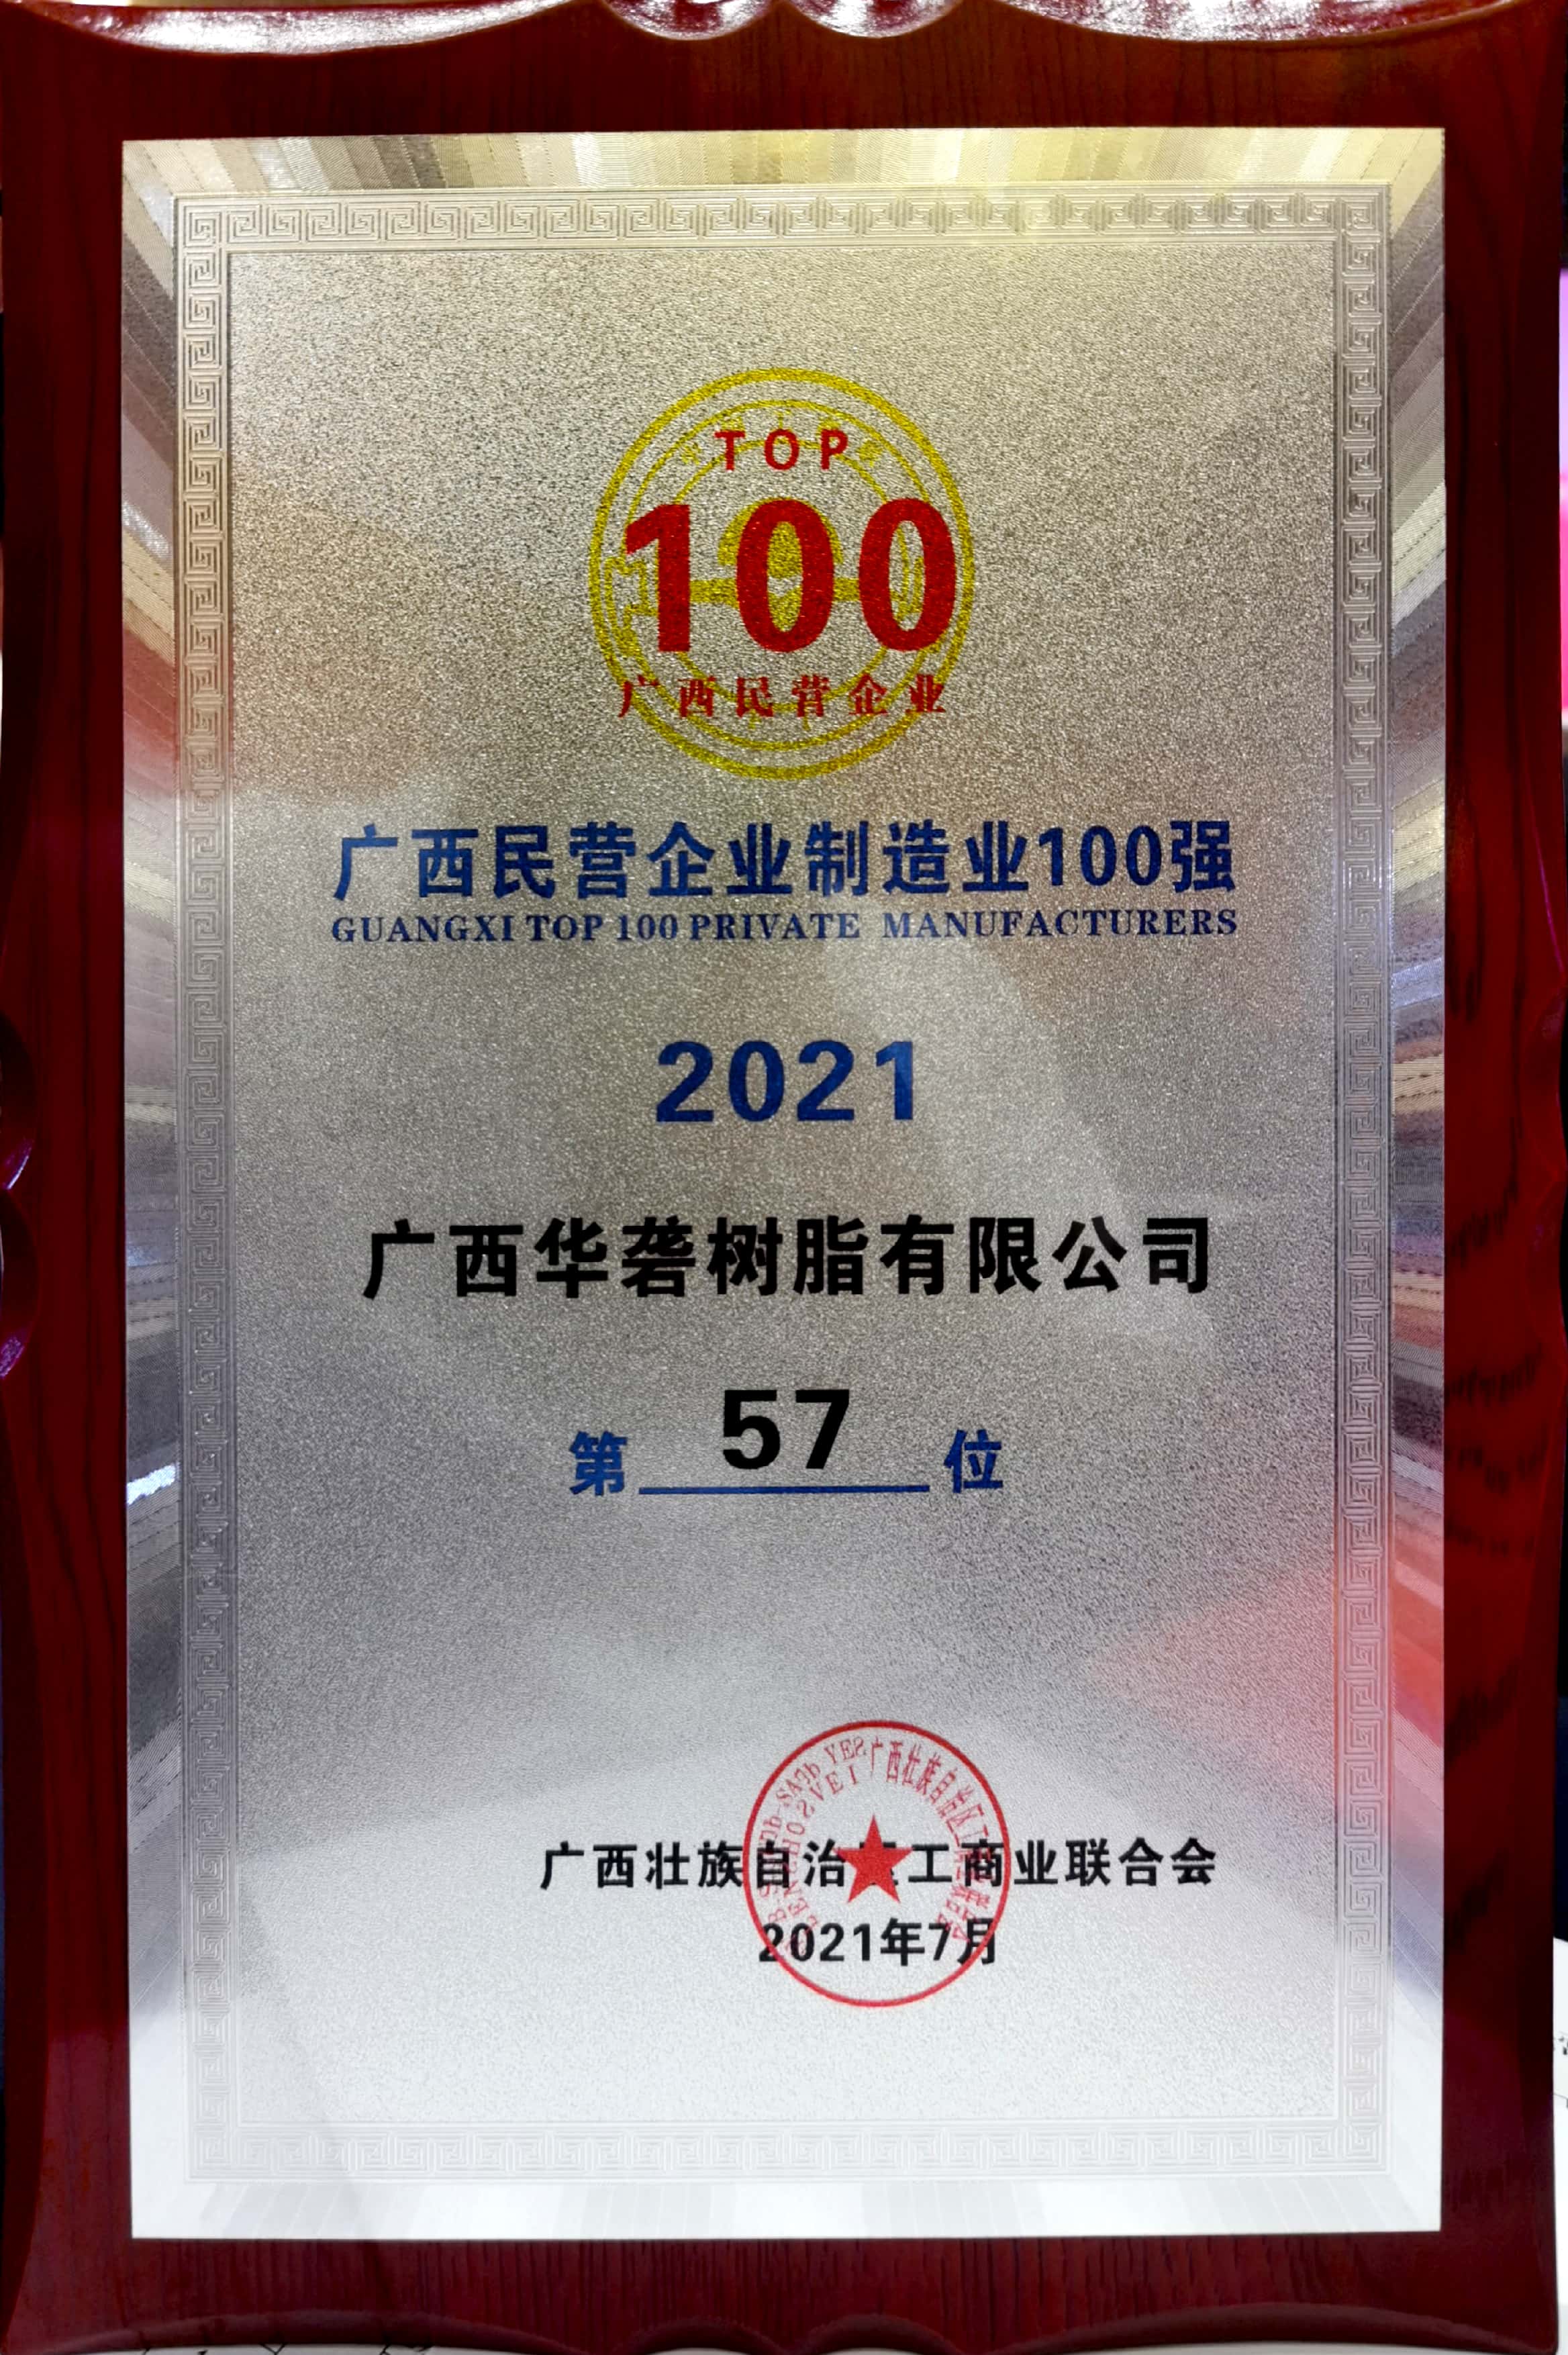 2021 "Top 100 Guangxi Private Enterprise of Manufacturing Industry" in Guangxi province.